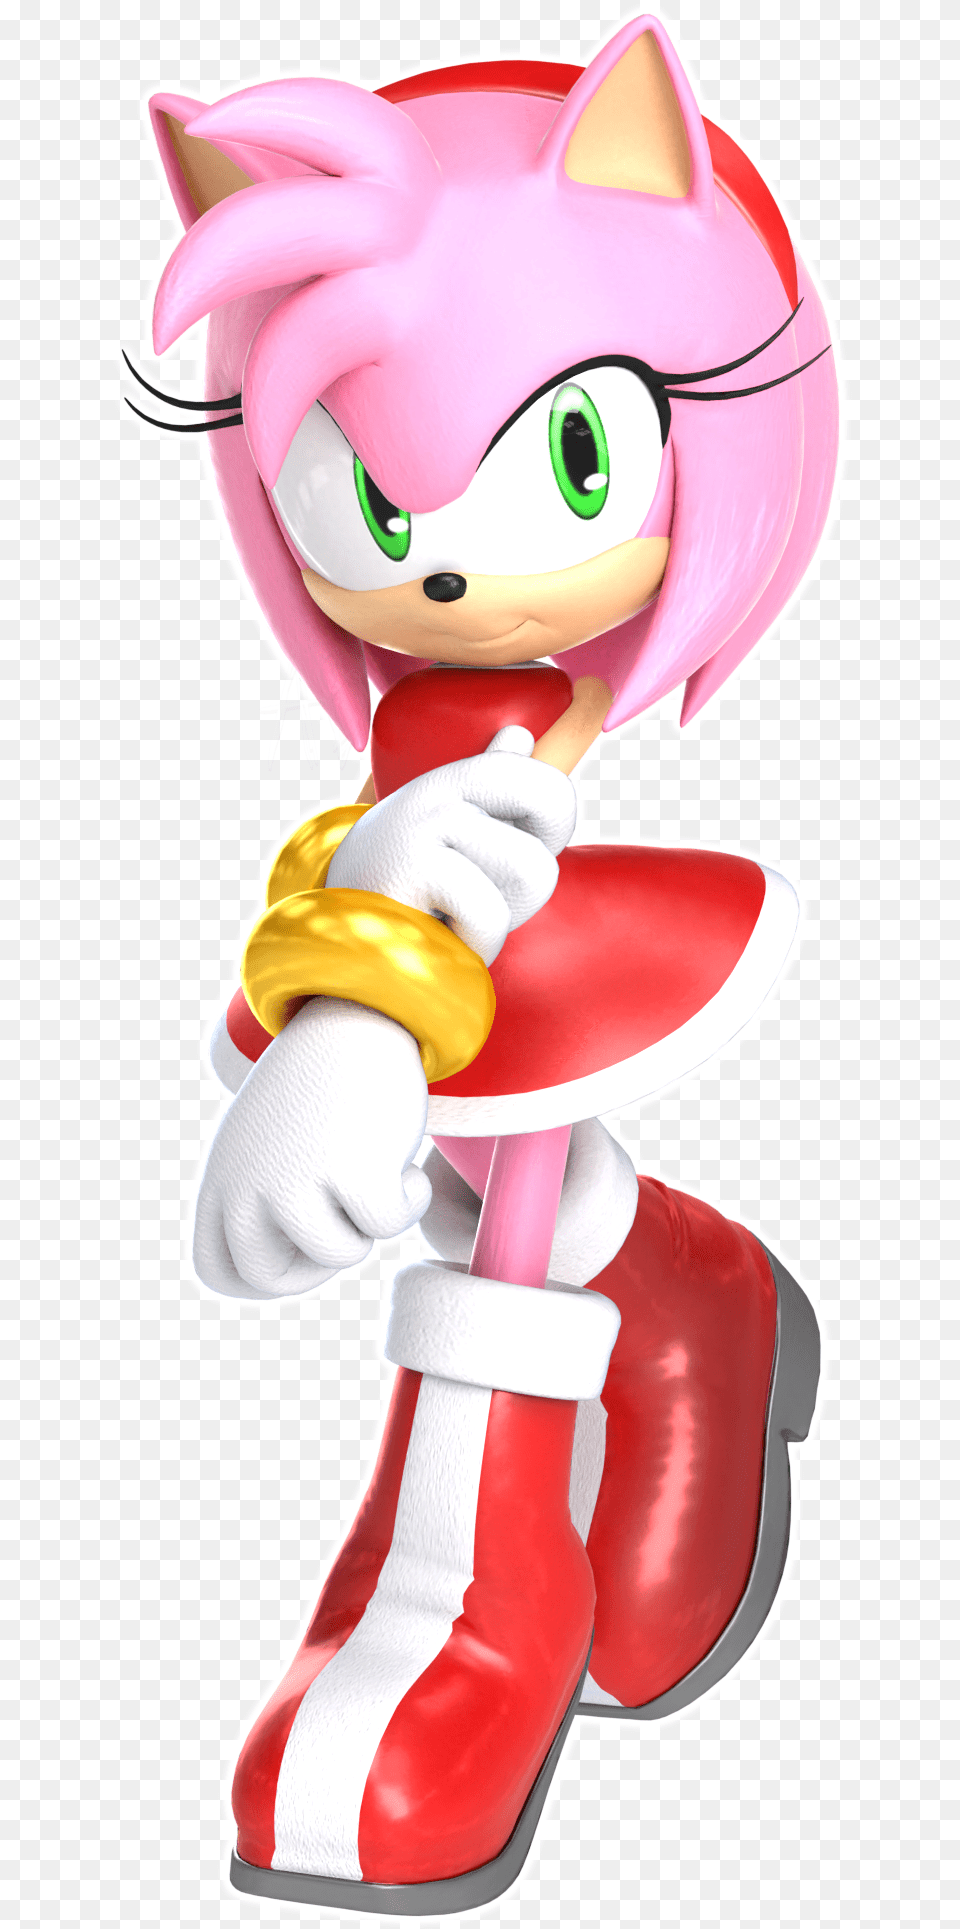 Or Bad Idea Amy Rose As A Reverse Harem Art Amy Rose Realistic, Clothing, Footwear, Shoe, Baby Png Image